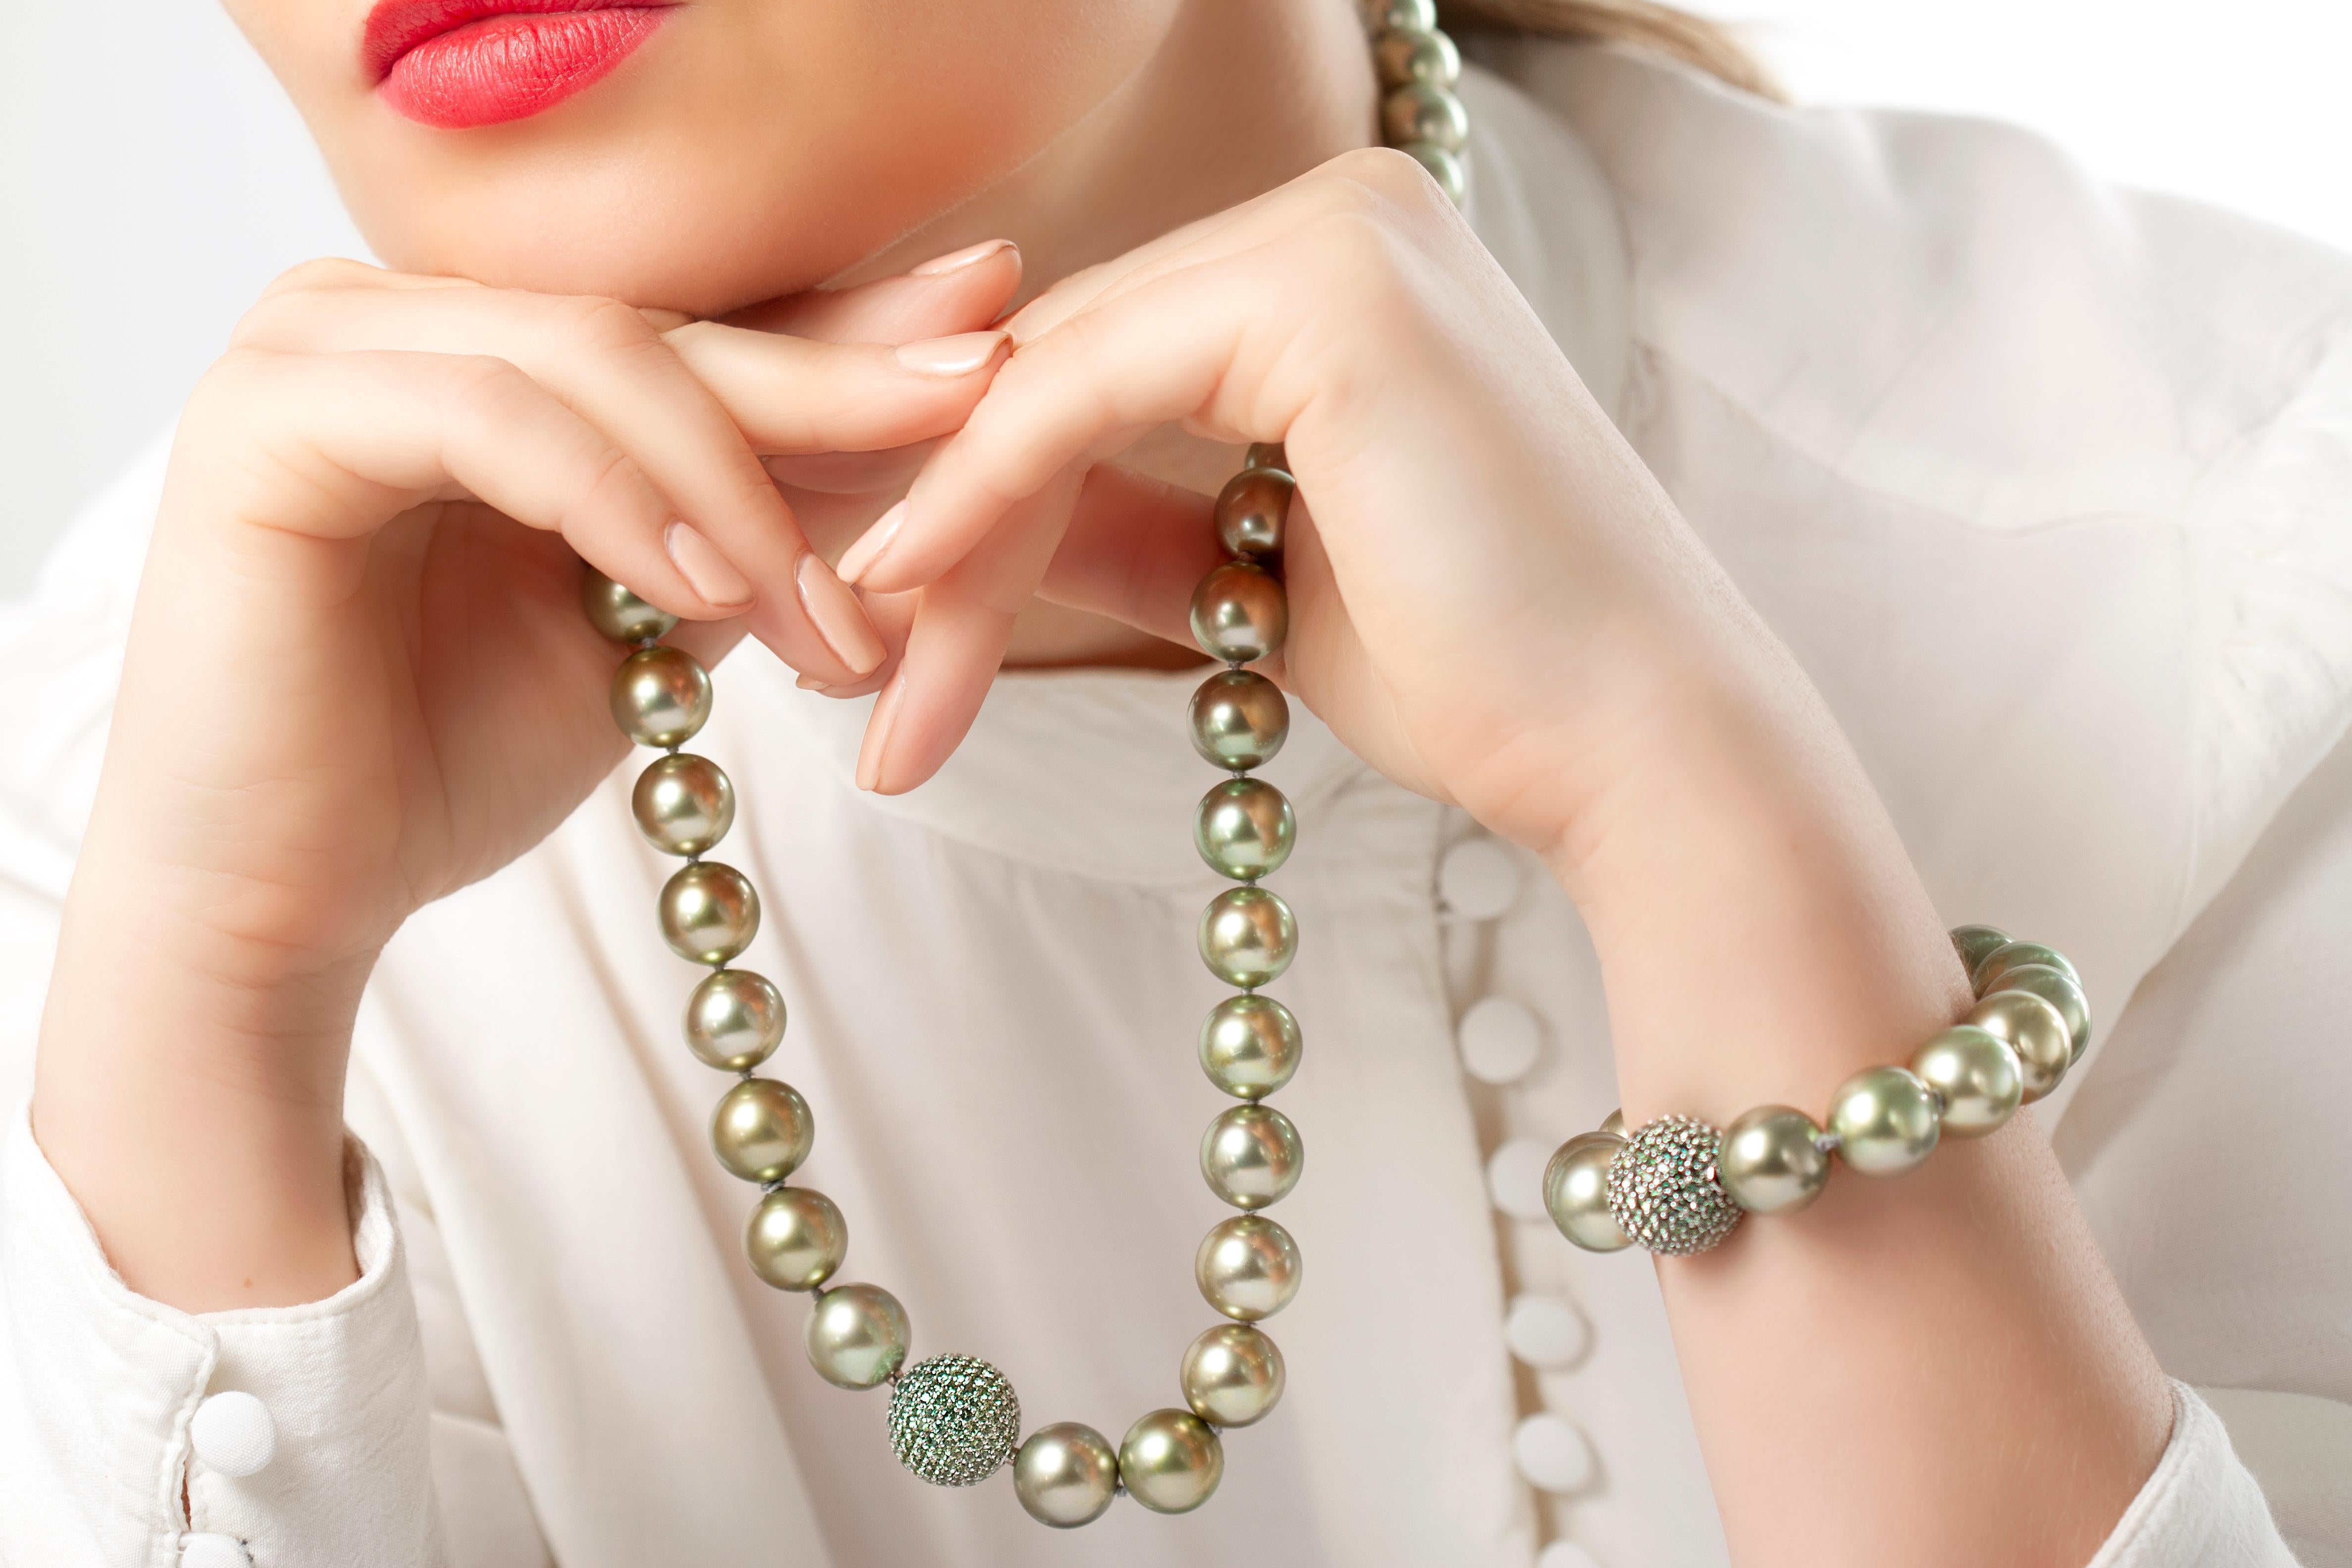 This spectacular necklace by Yoko London features large, pistachio-colour Tahitian pearls, which softly graduate in size from 12-14.9mm, allowing the necklace to sit elegantly upon its wearer’s neck. The soft hue of the pearls is enriched by the